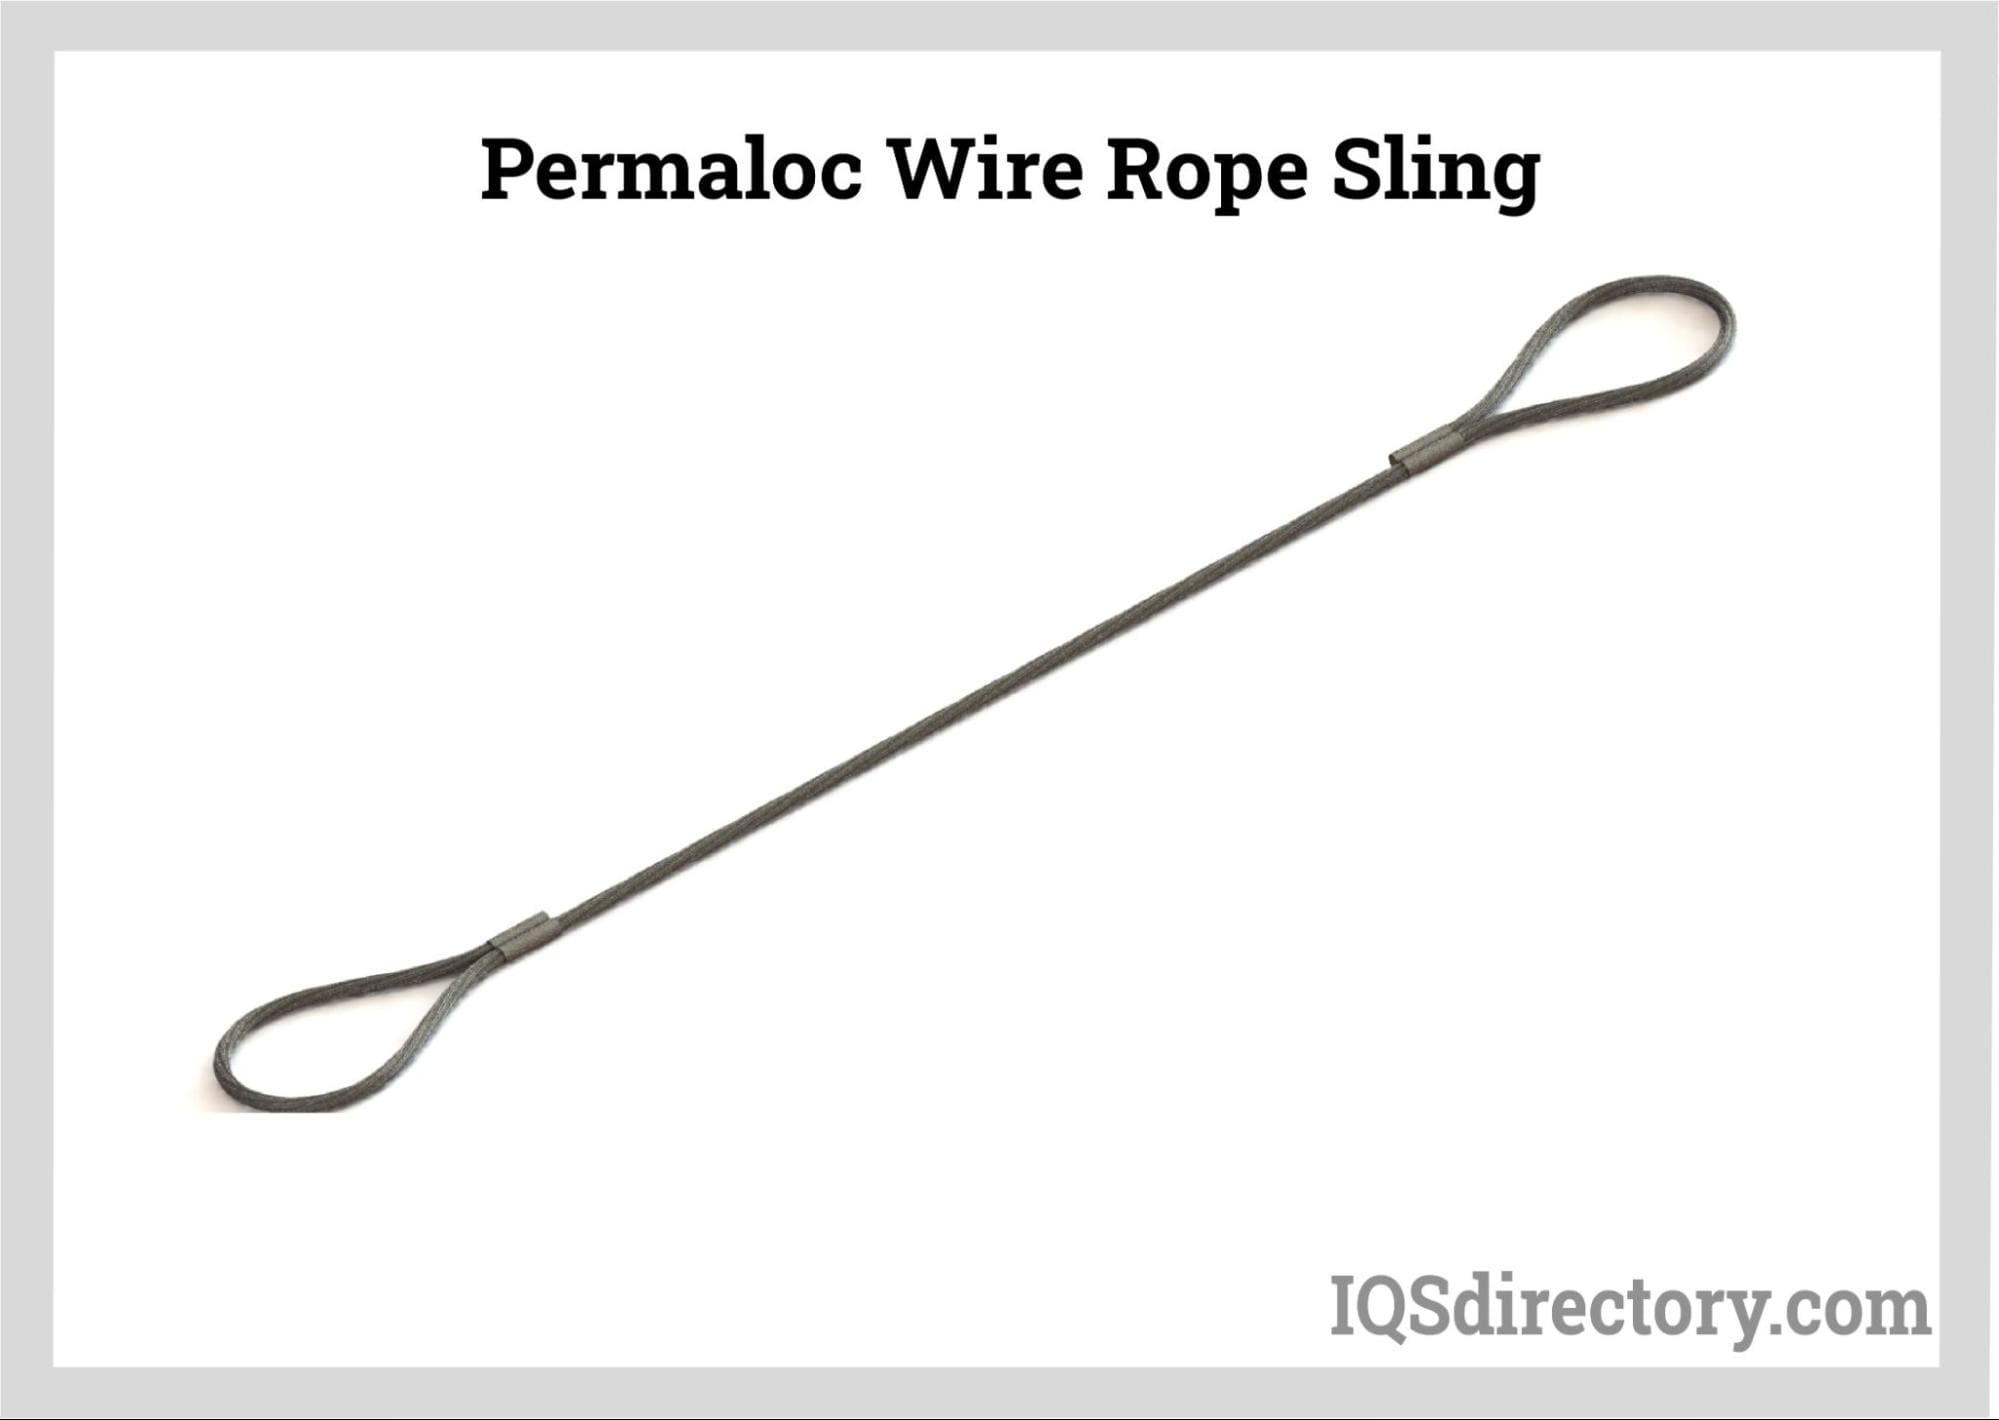 Permaloc Wire Rope Sling